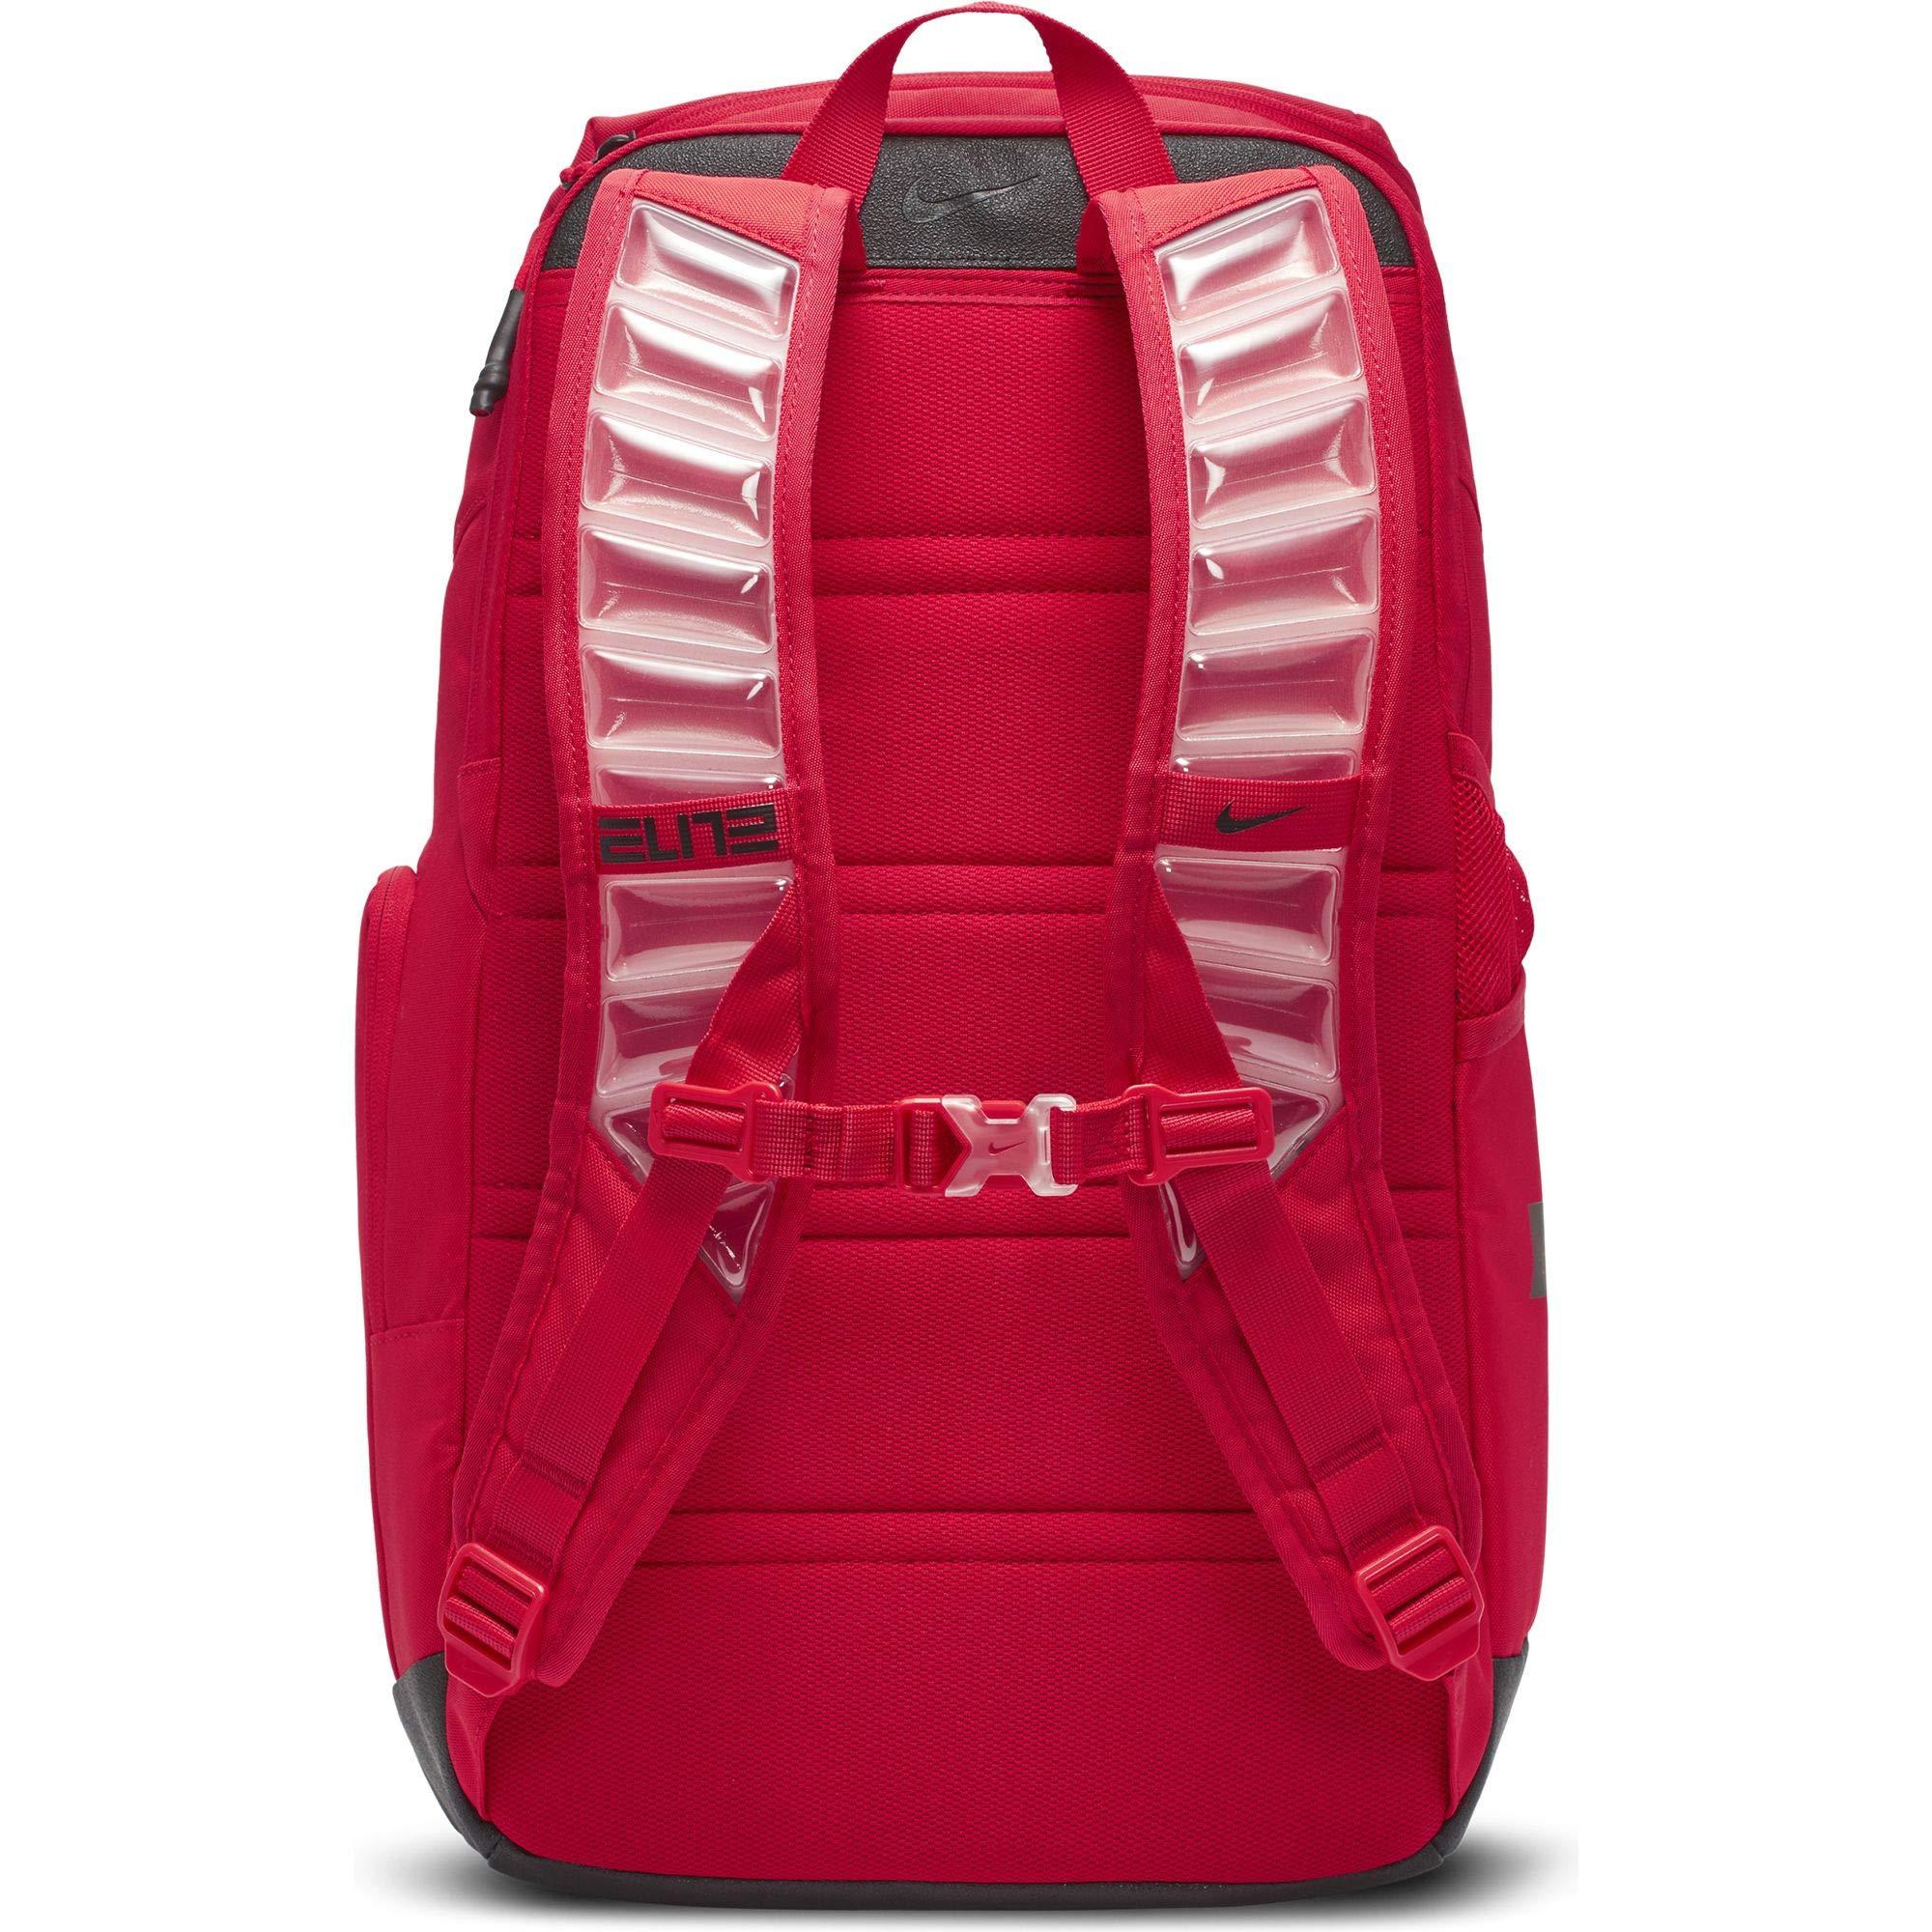 Nike Synthetic Hoops Elite Pro Backpack in Red | Lyst